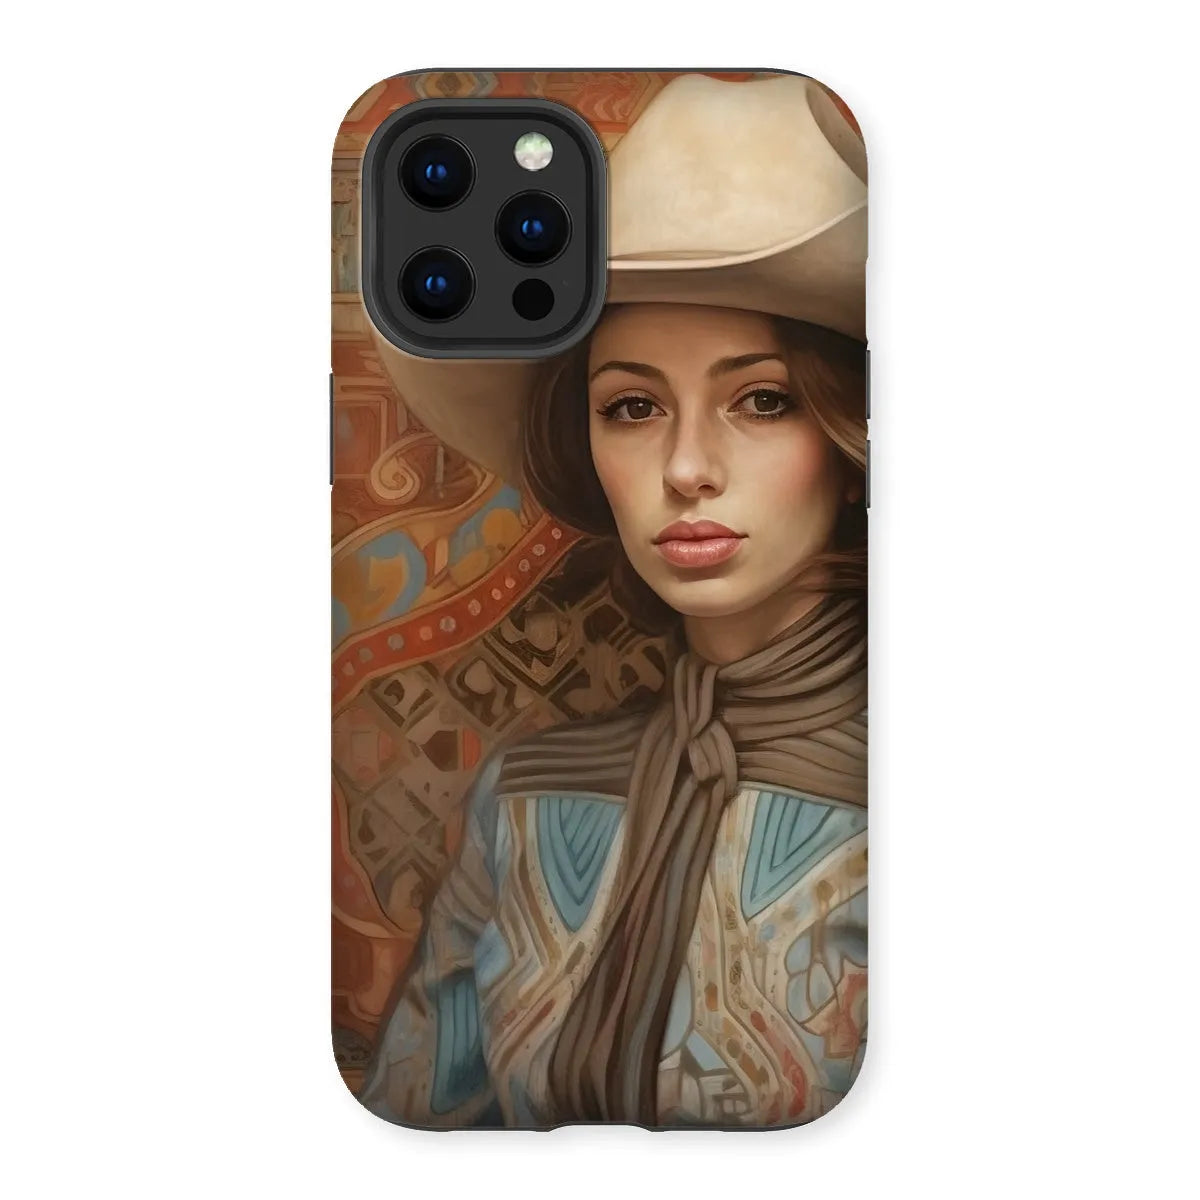 Anahita The Lesbian Cowgirl - Sapphic Art Phone Case - Iphone 12 Pro Max / Matte - Mobile Phone Cases - Aesthetic Art